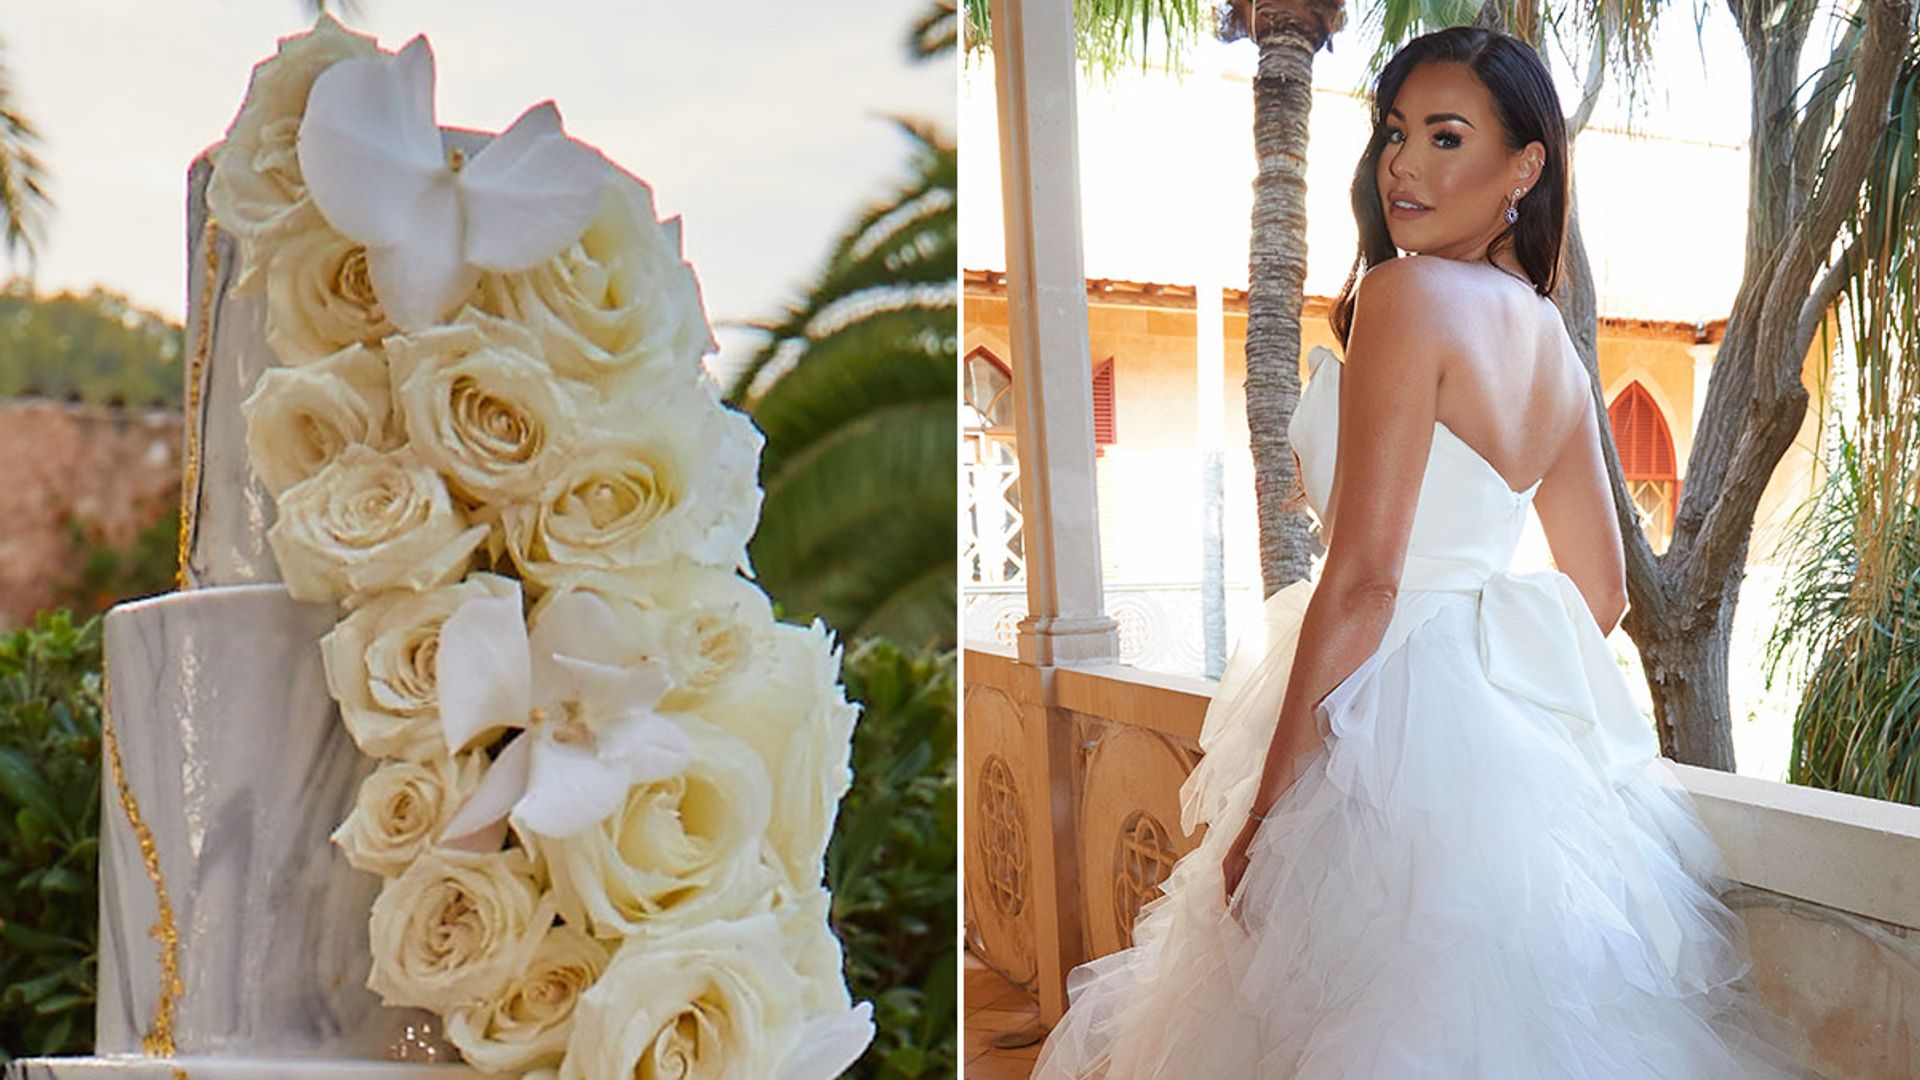 Jessica Wright and William Lee-Kemp's beautiful five-tiered wedding cake revealed